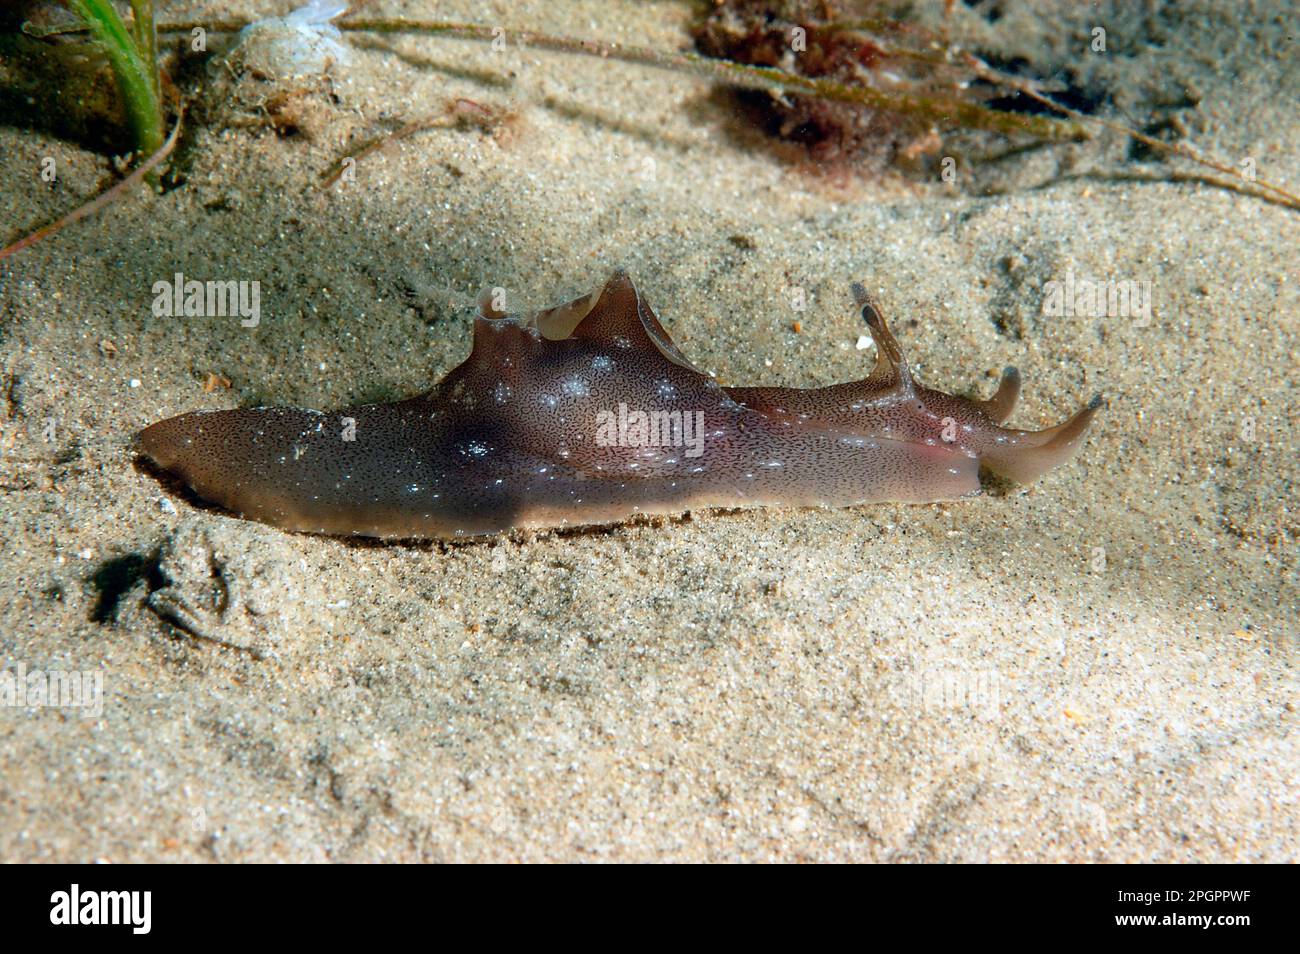 Spotted sea-hare, Spotted sea-hares, Other animals, Sea snails, Snails, Animals, Molluscs, Sea-hare (Aplysia punctata) adult, on sandy seabed Stock Photo